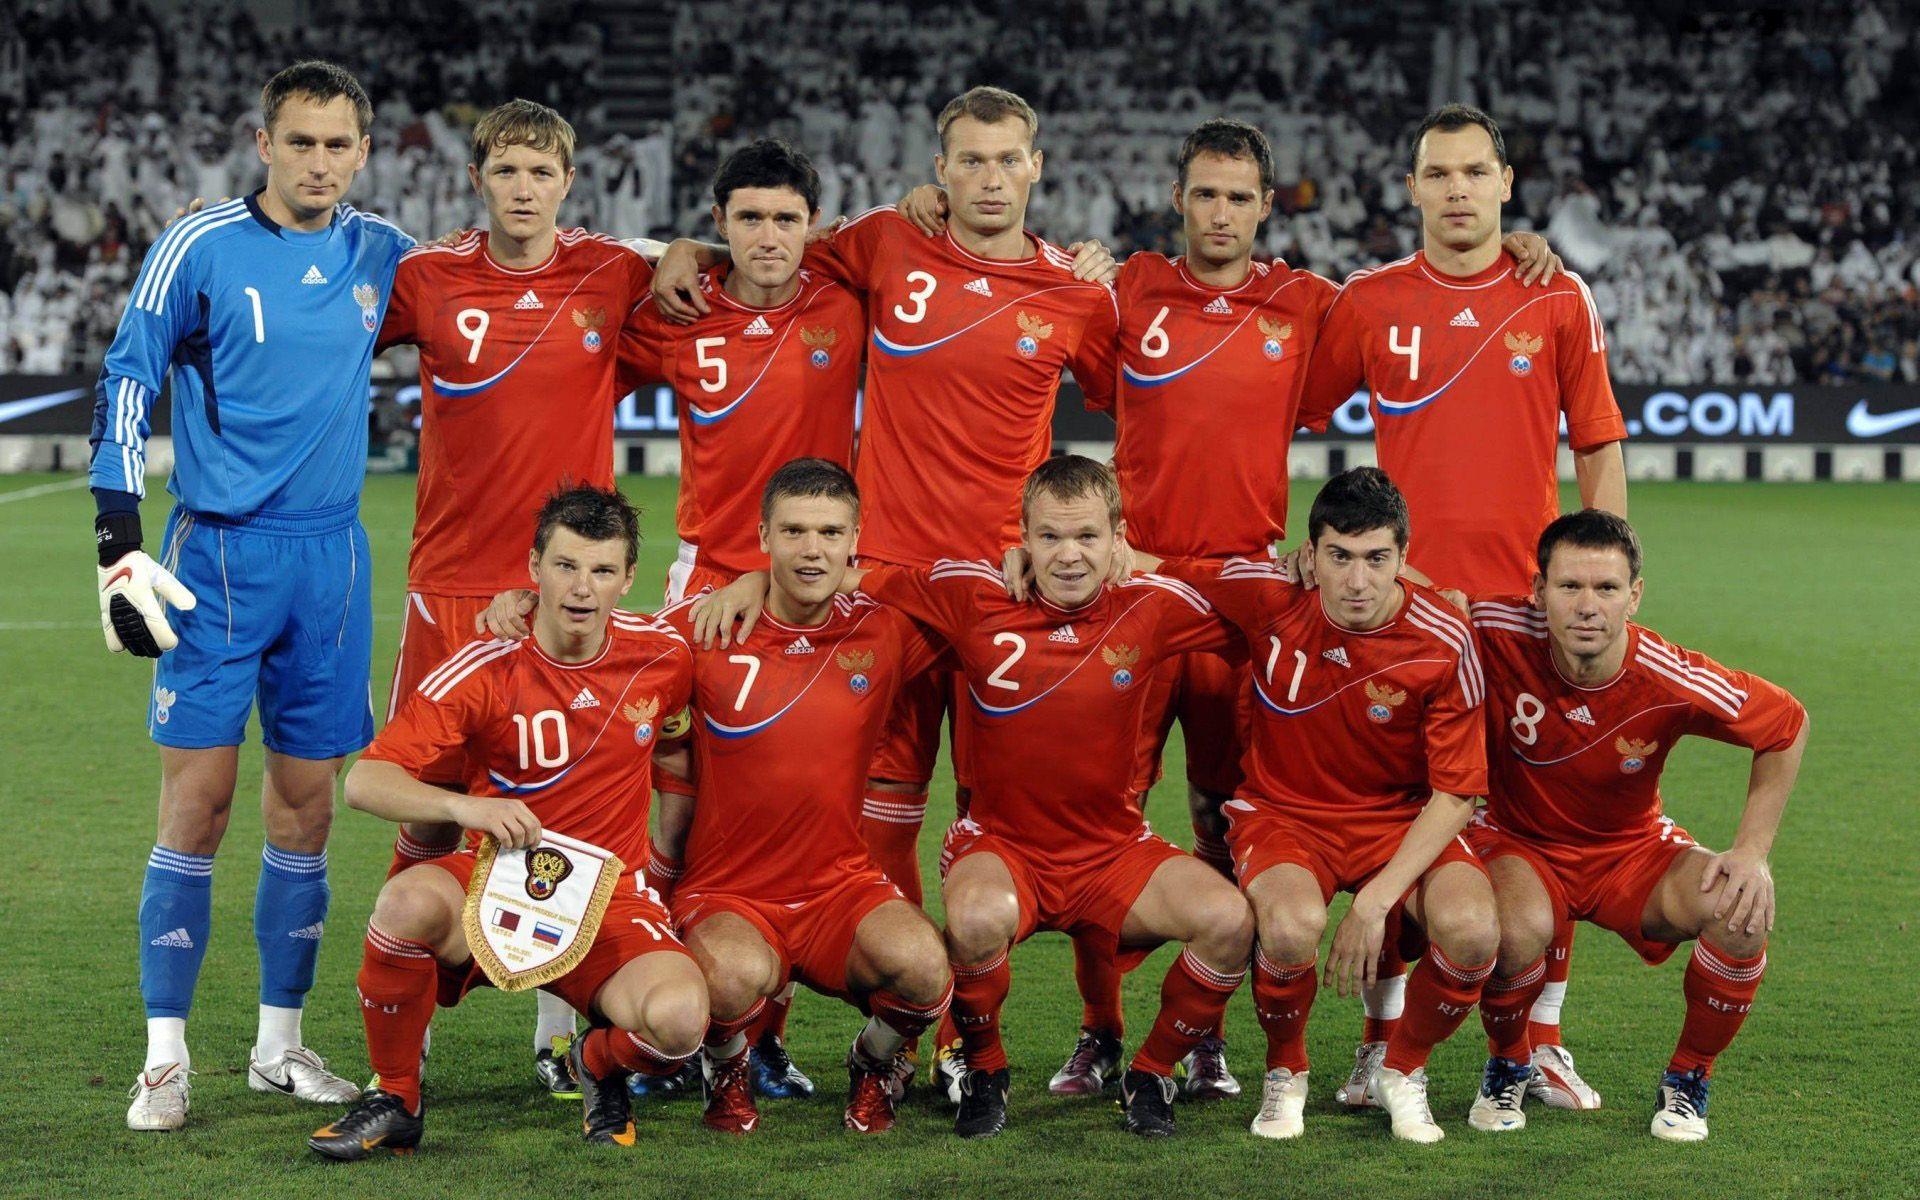 Russian national team. Euro 2012 wallpaper and image